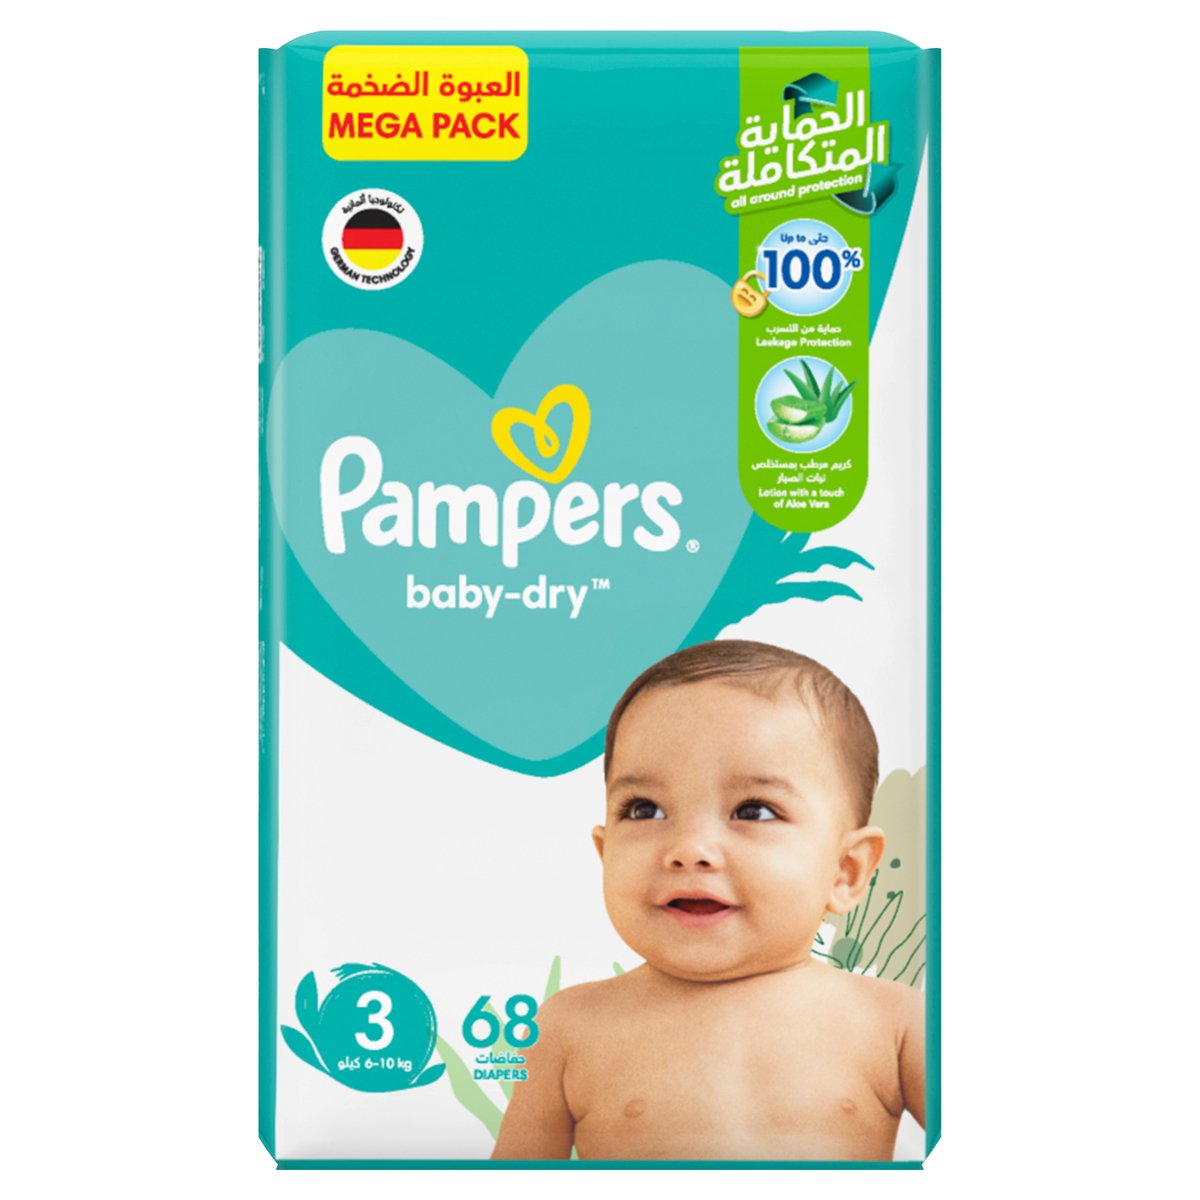 Pampers Baby-Dry Taped Diapers with Aloe Vera Lotion, up to 100% Leakage Protection, Size 3, 6-10kg, 68 pcs